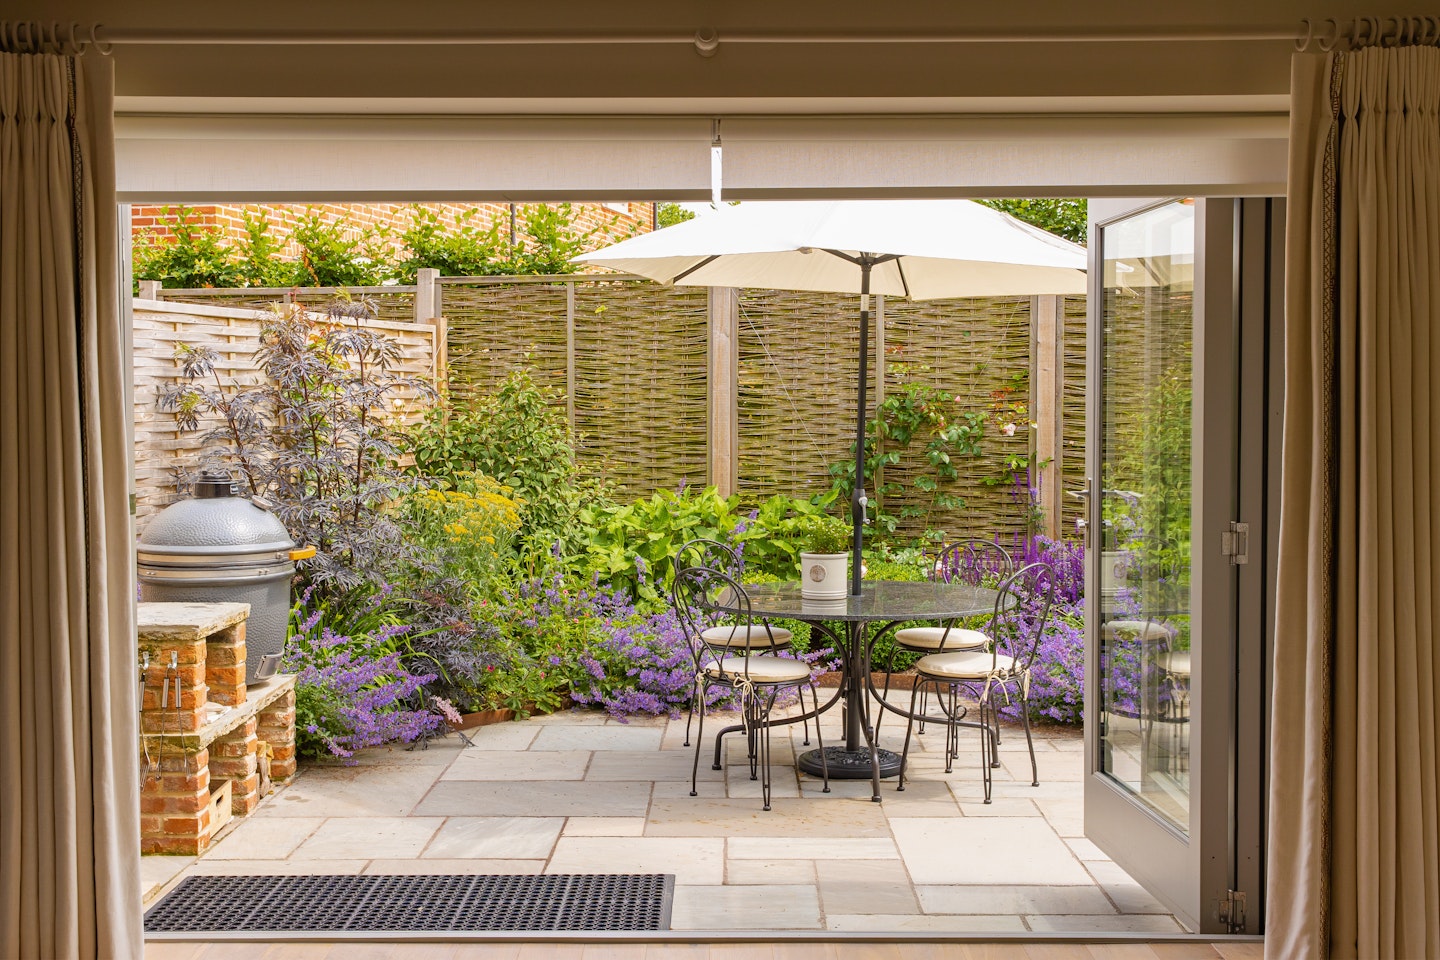 Delightful patio area with pizza oven, barbecue and garden furniture